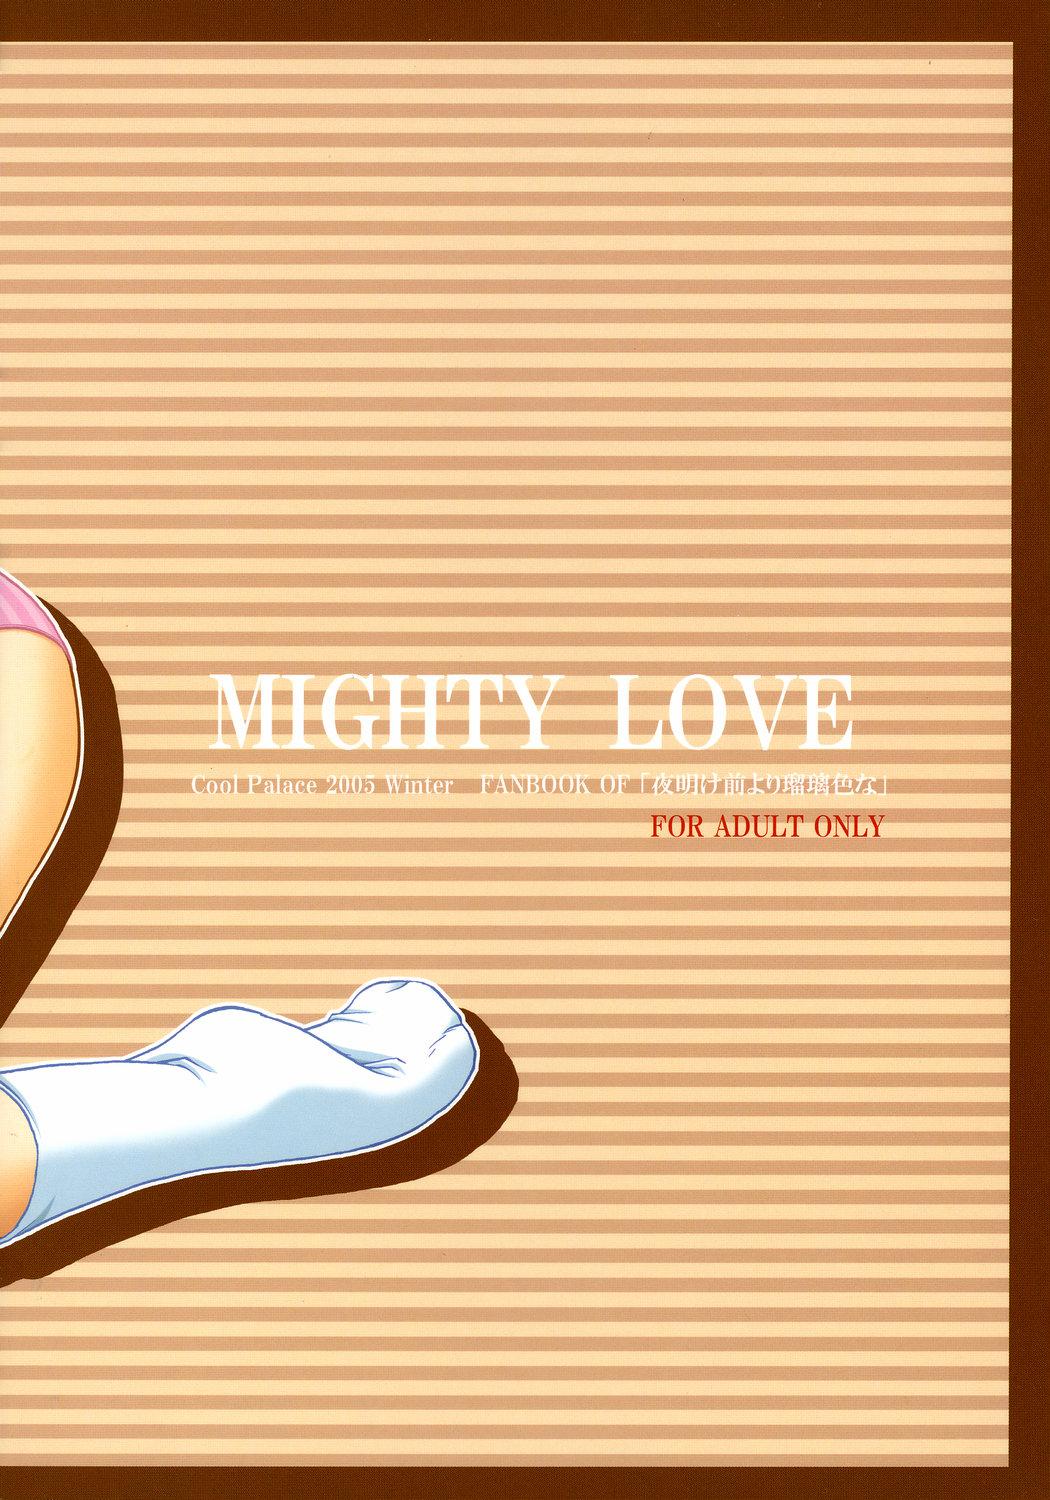 MIGHTY LOVE 29